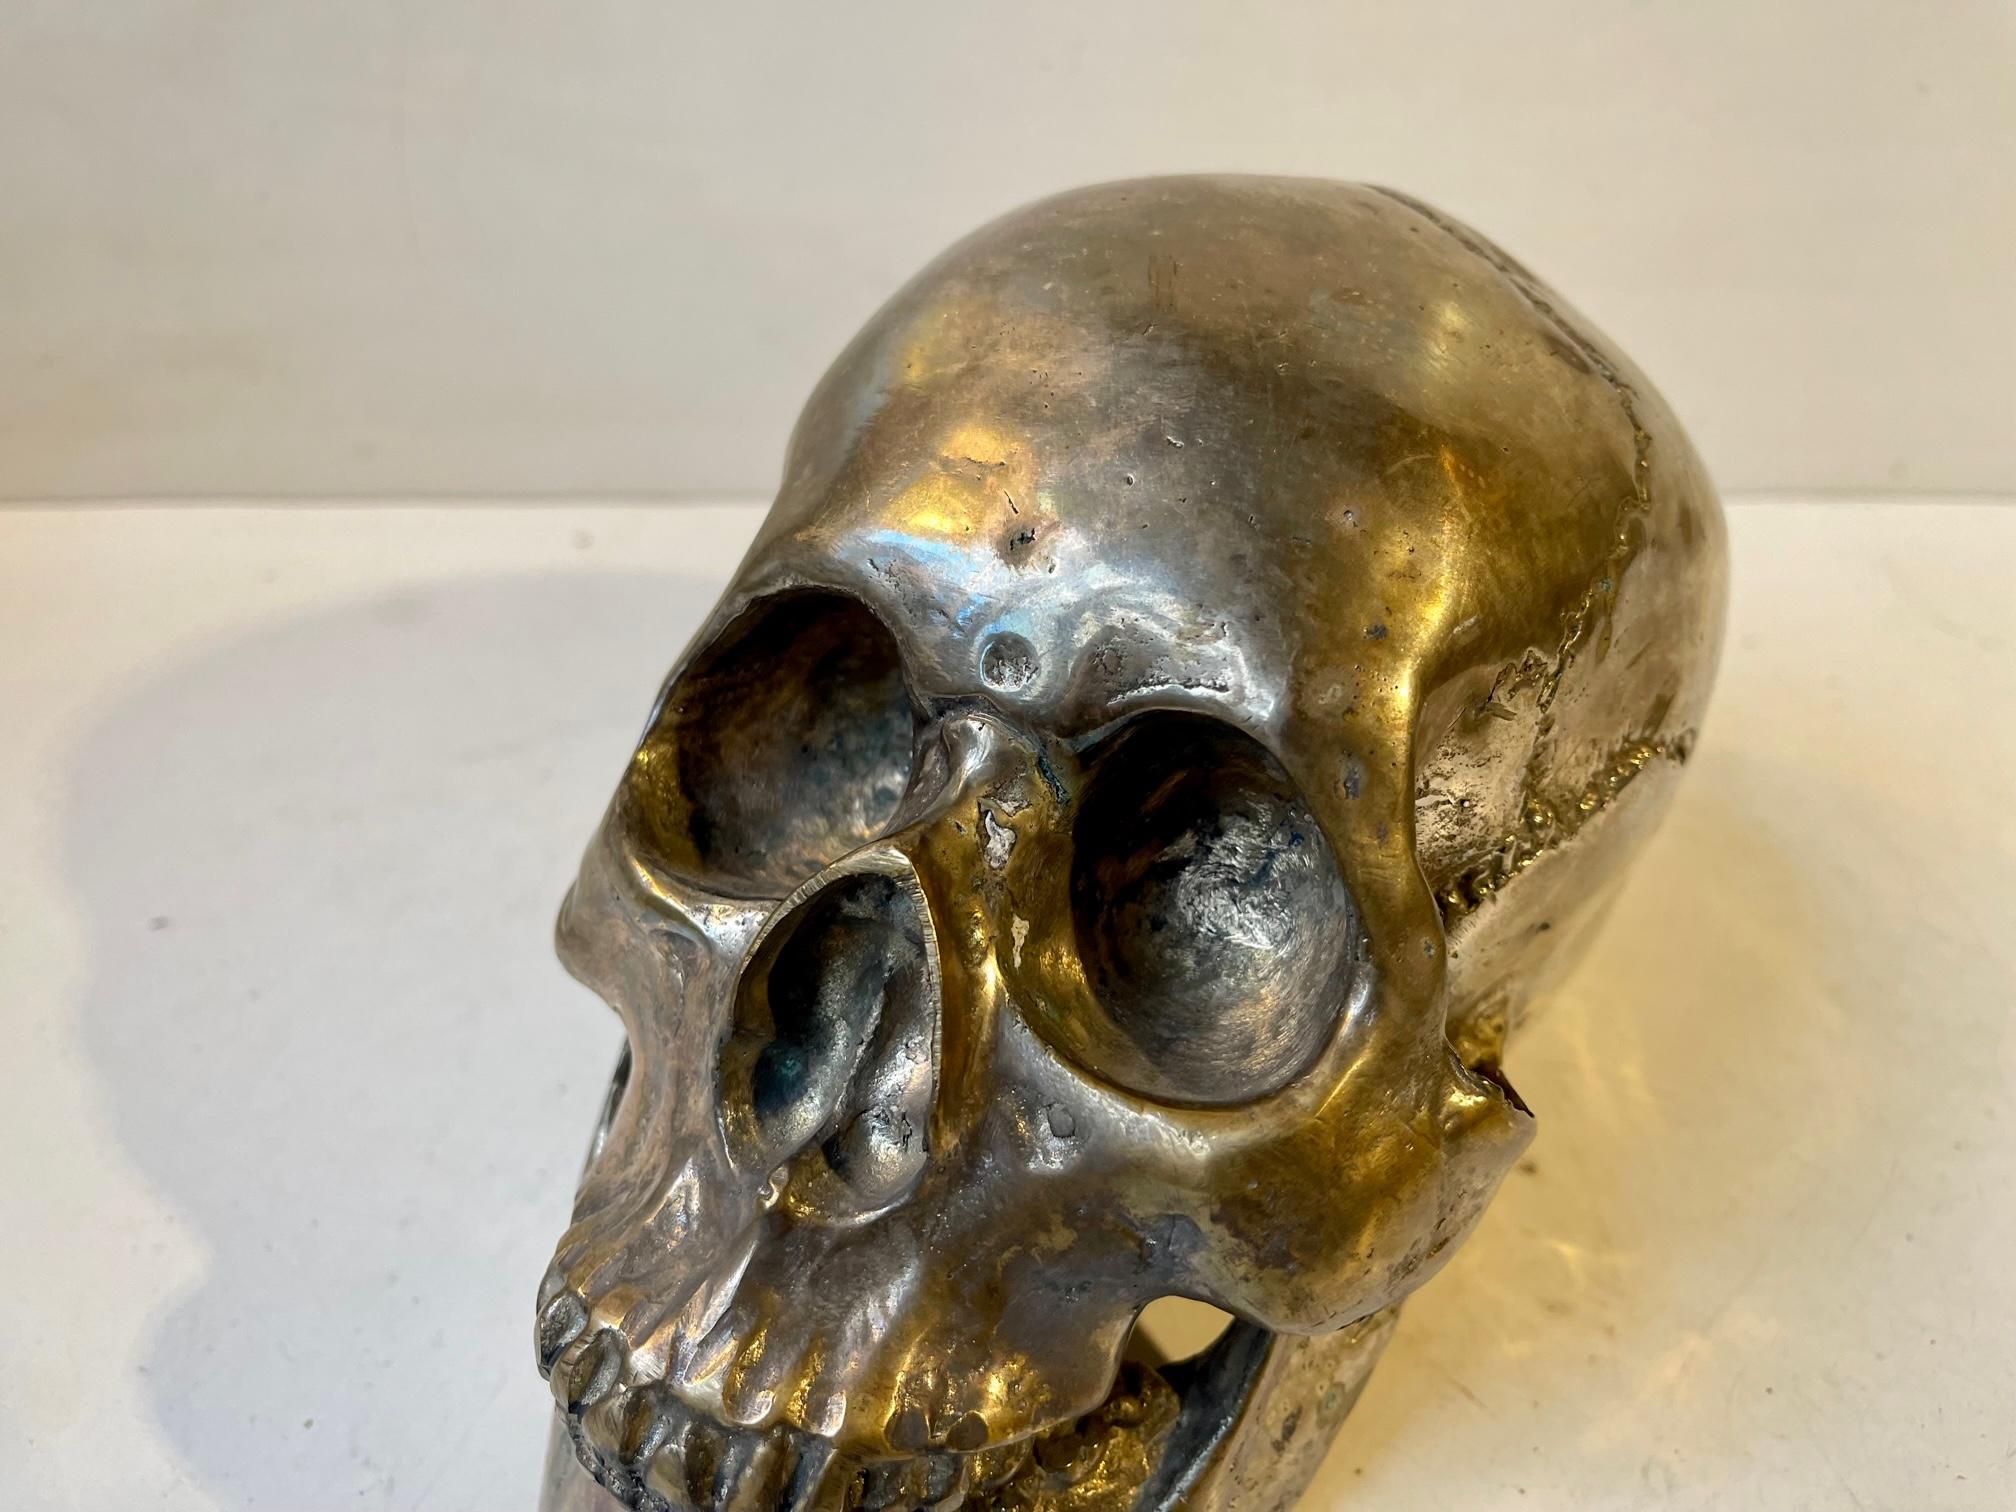 Vintage Bronze Cast of a Human Skull 1:1, 1950s In Good Condition For Sale In Esbjerg, DK